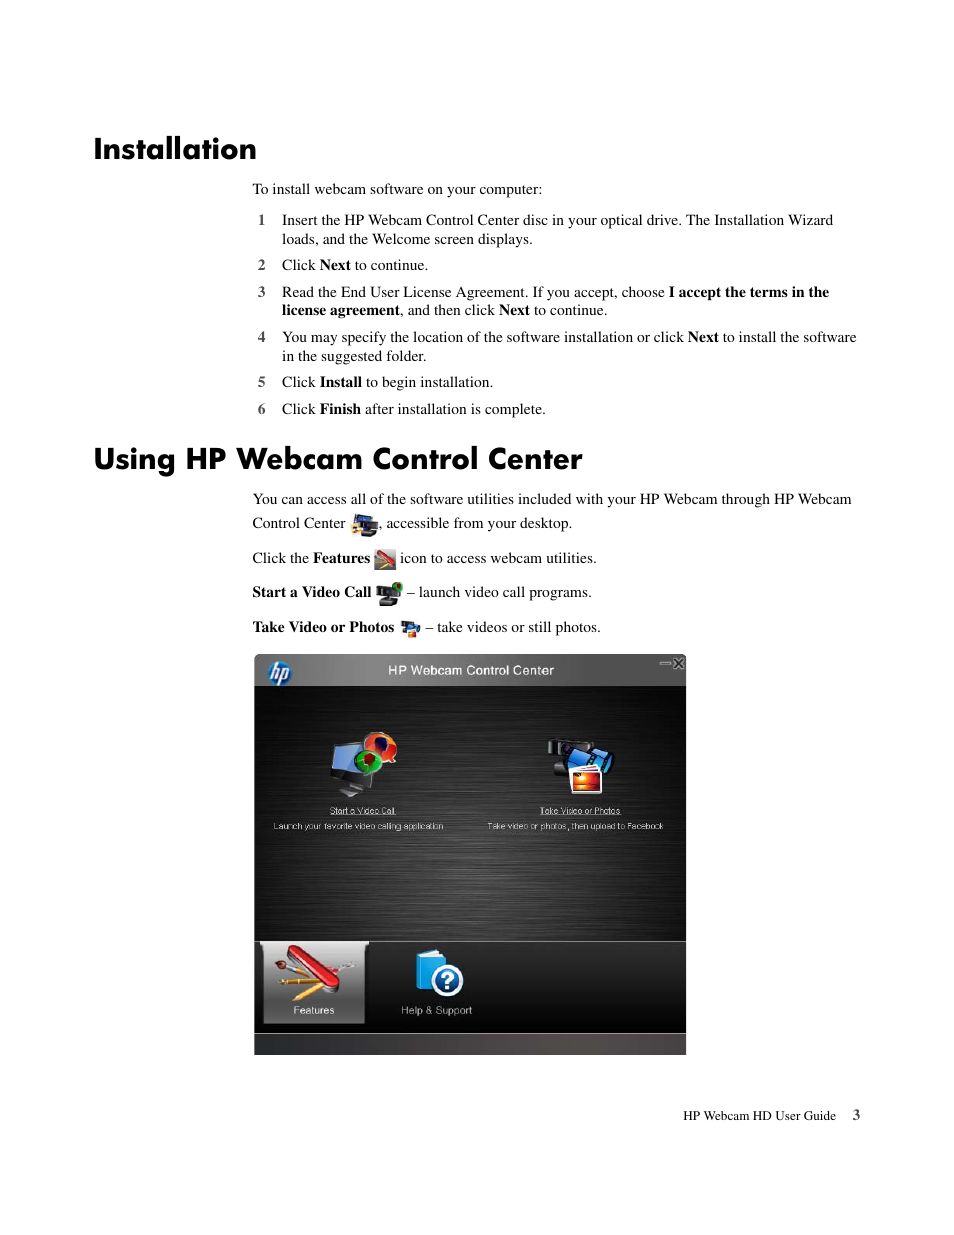 Installation, Using hp webcam control center | HP HD 2300 Webcam User  Manual | Page 7 / 12